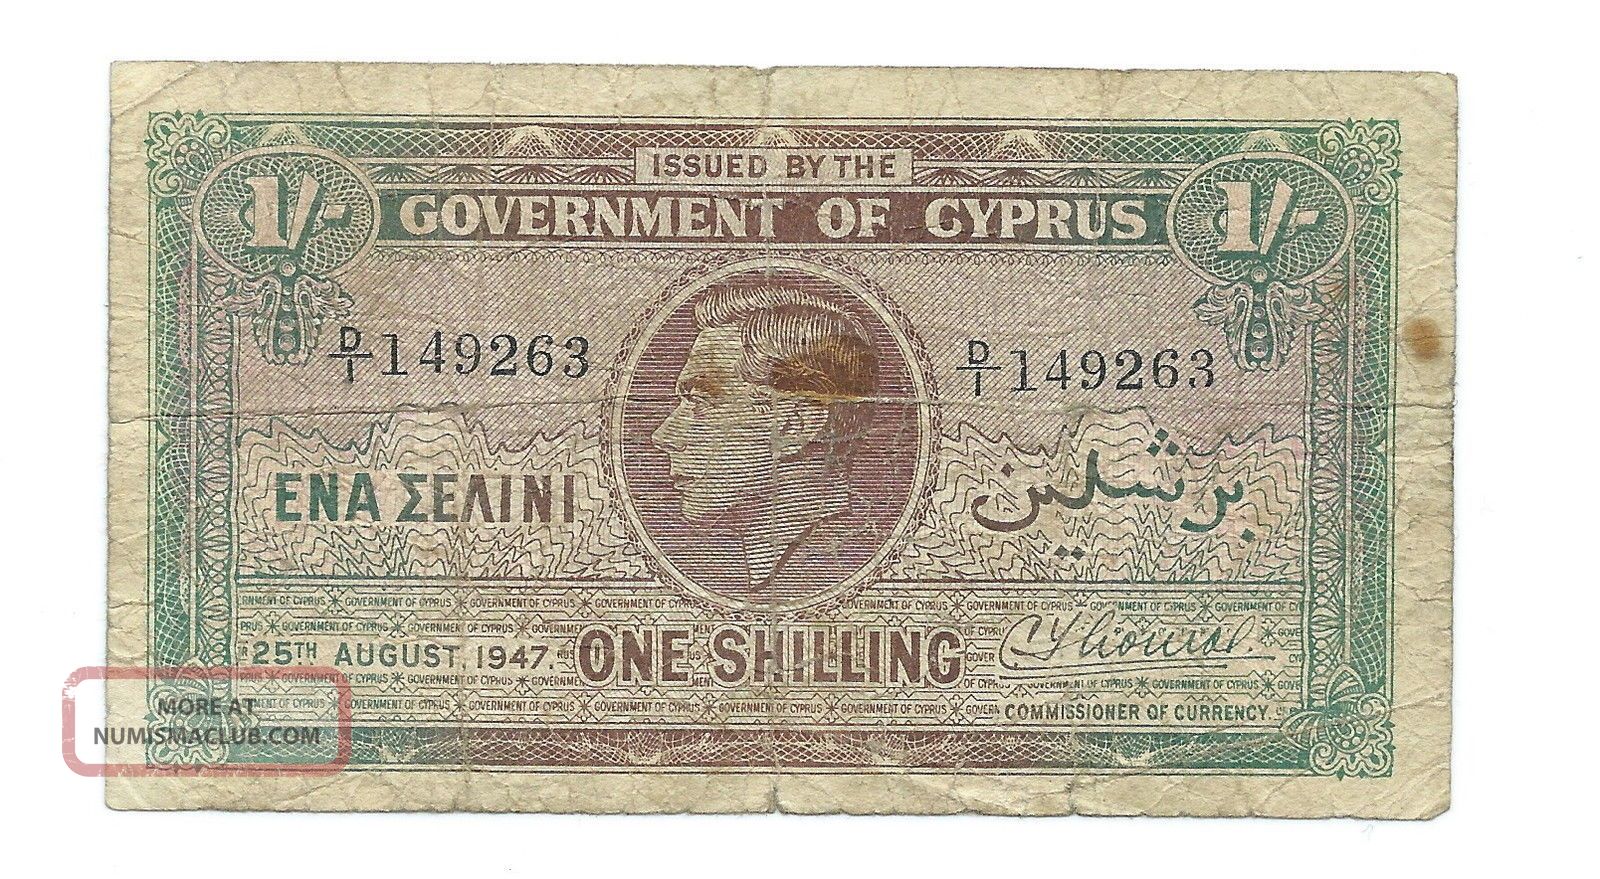 Cyprus 1947 One Shilling Banknote,  Serial Number: D/1 149263 Very Scarce, Europe photo